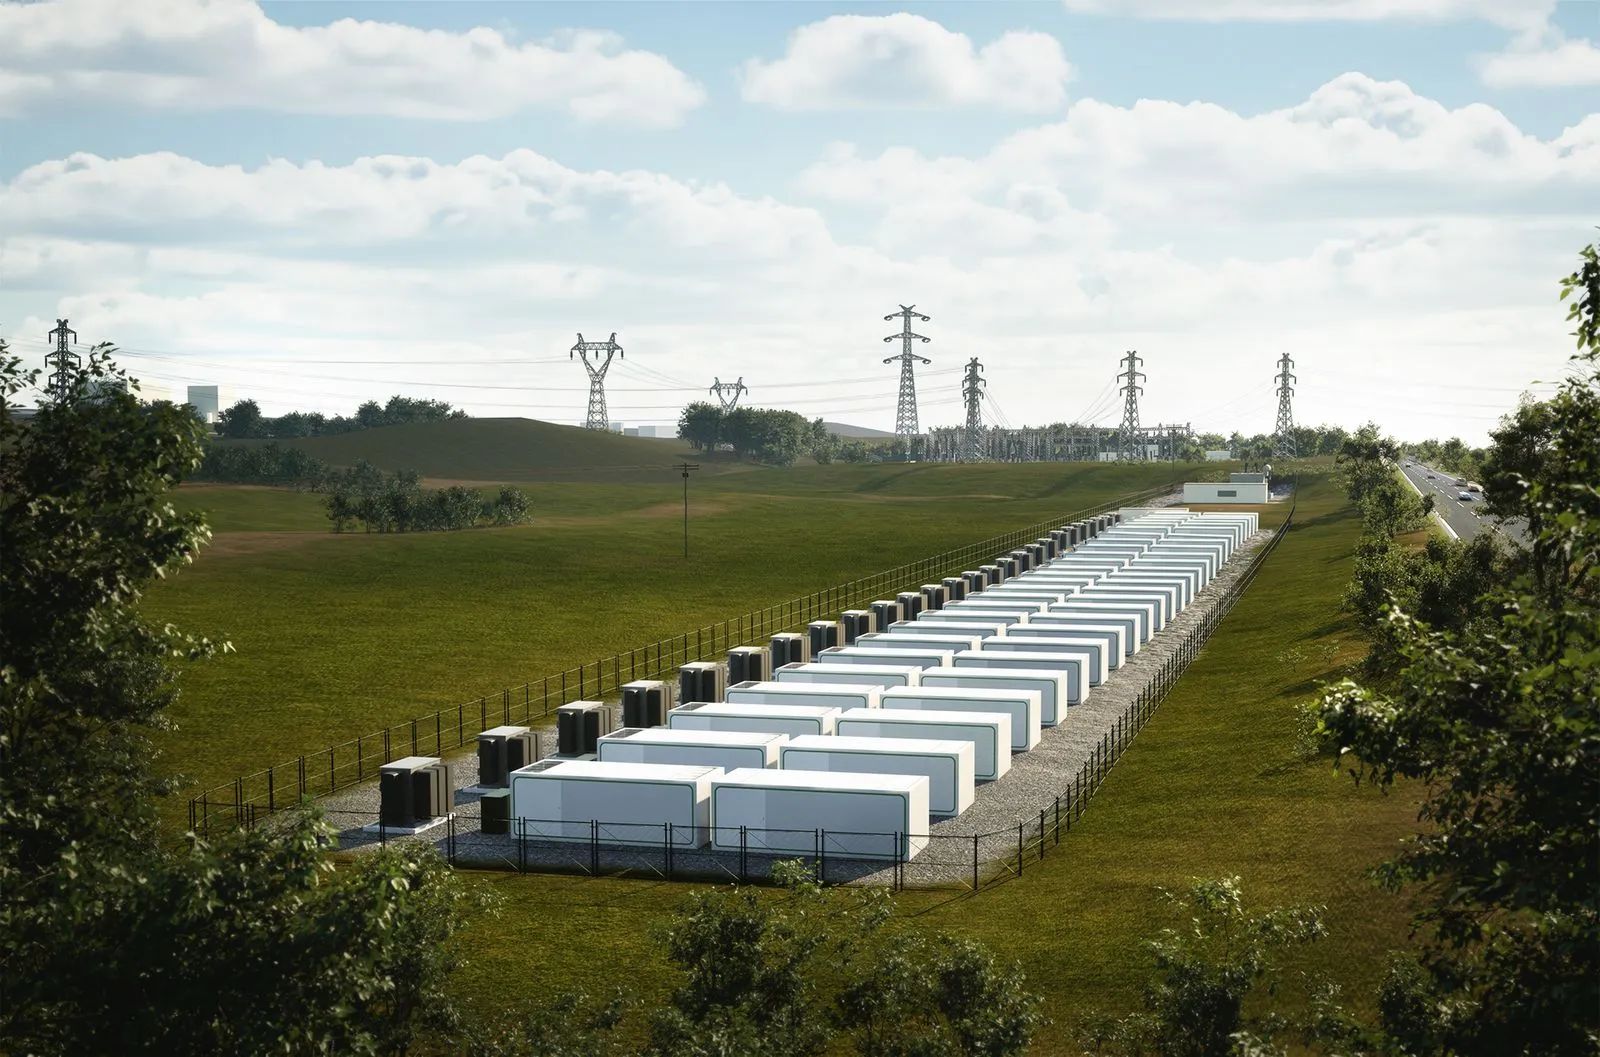 Kyon Energy Strengthens Germany’s Renewable Energy Storage with New 40 MWh Battery Facility